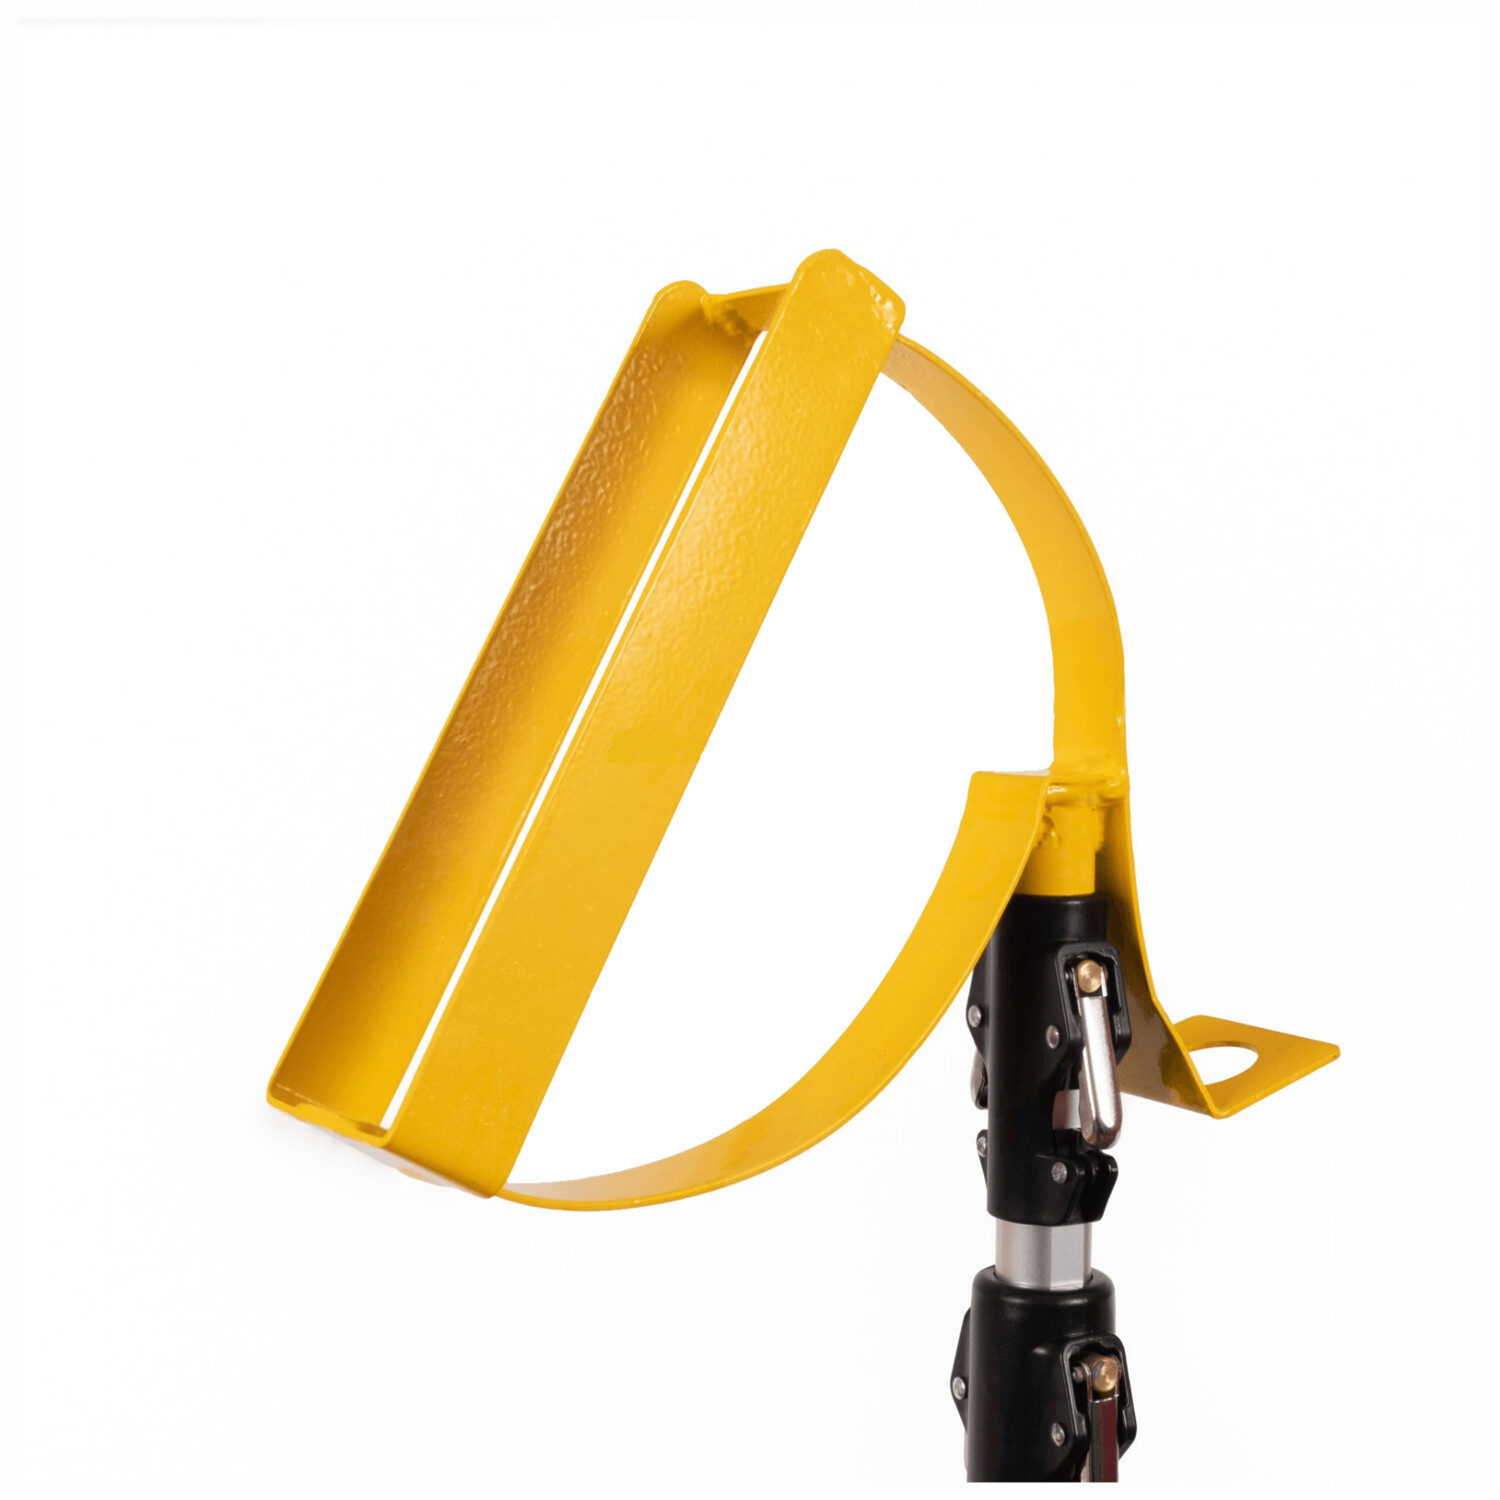 HEAVY DUTY STRAP THROWER
excl. VAT